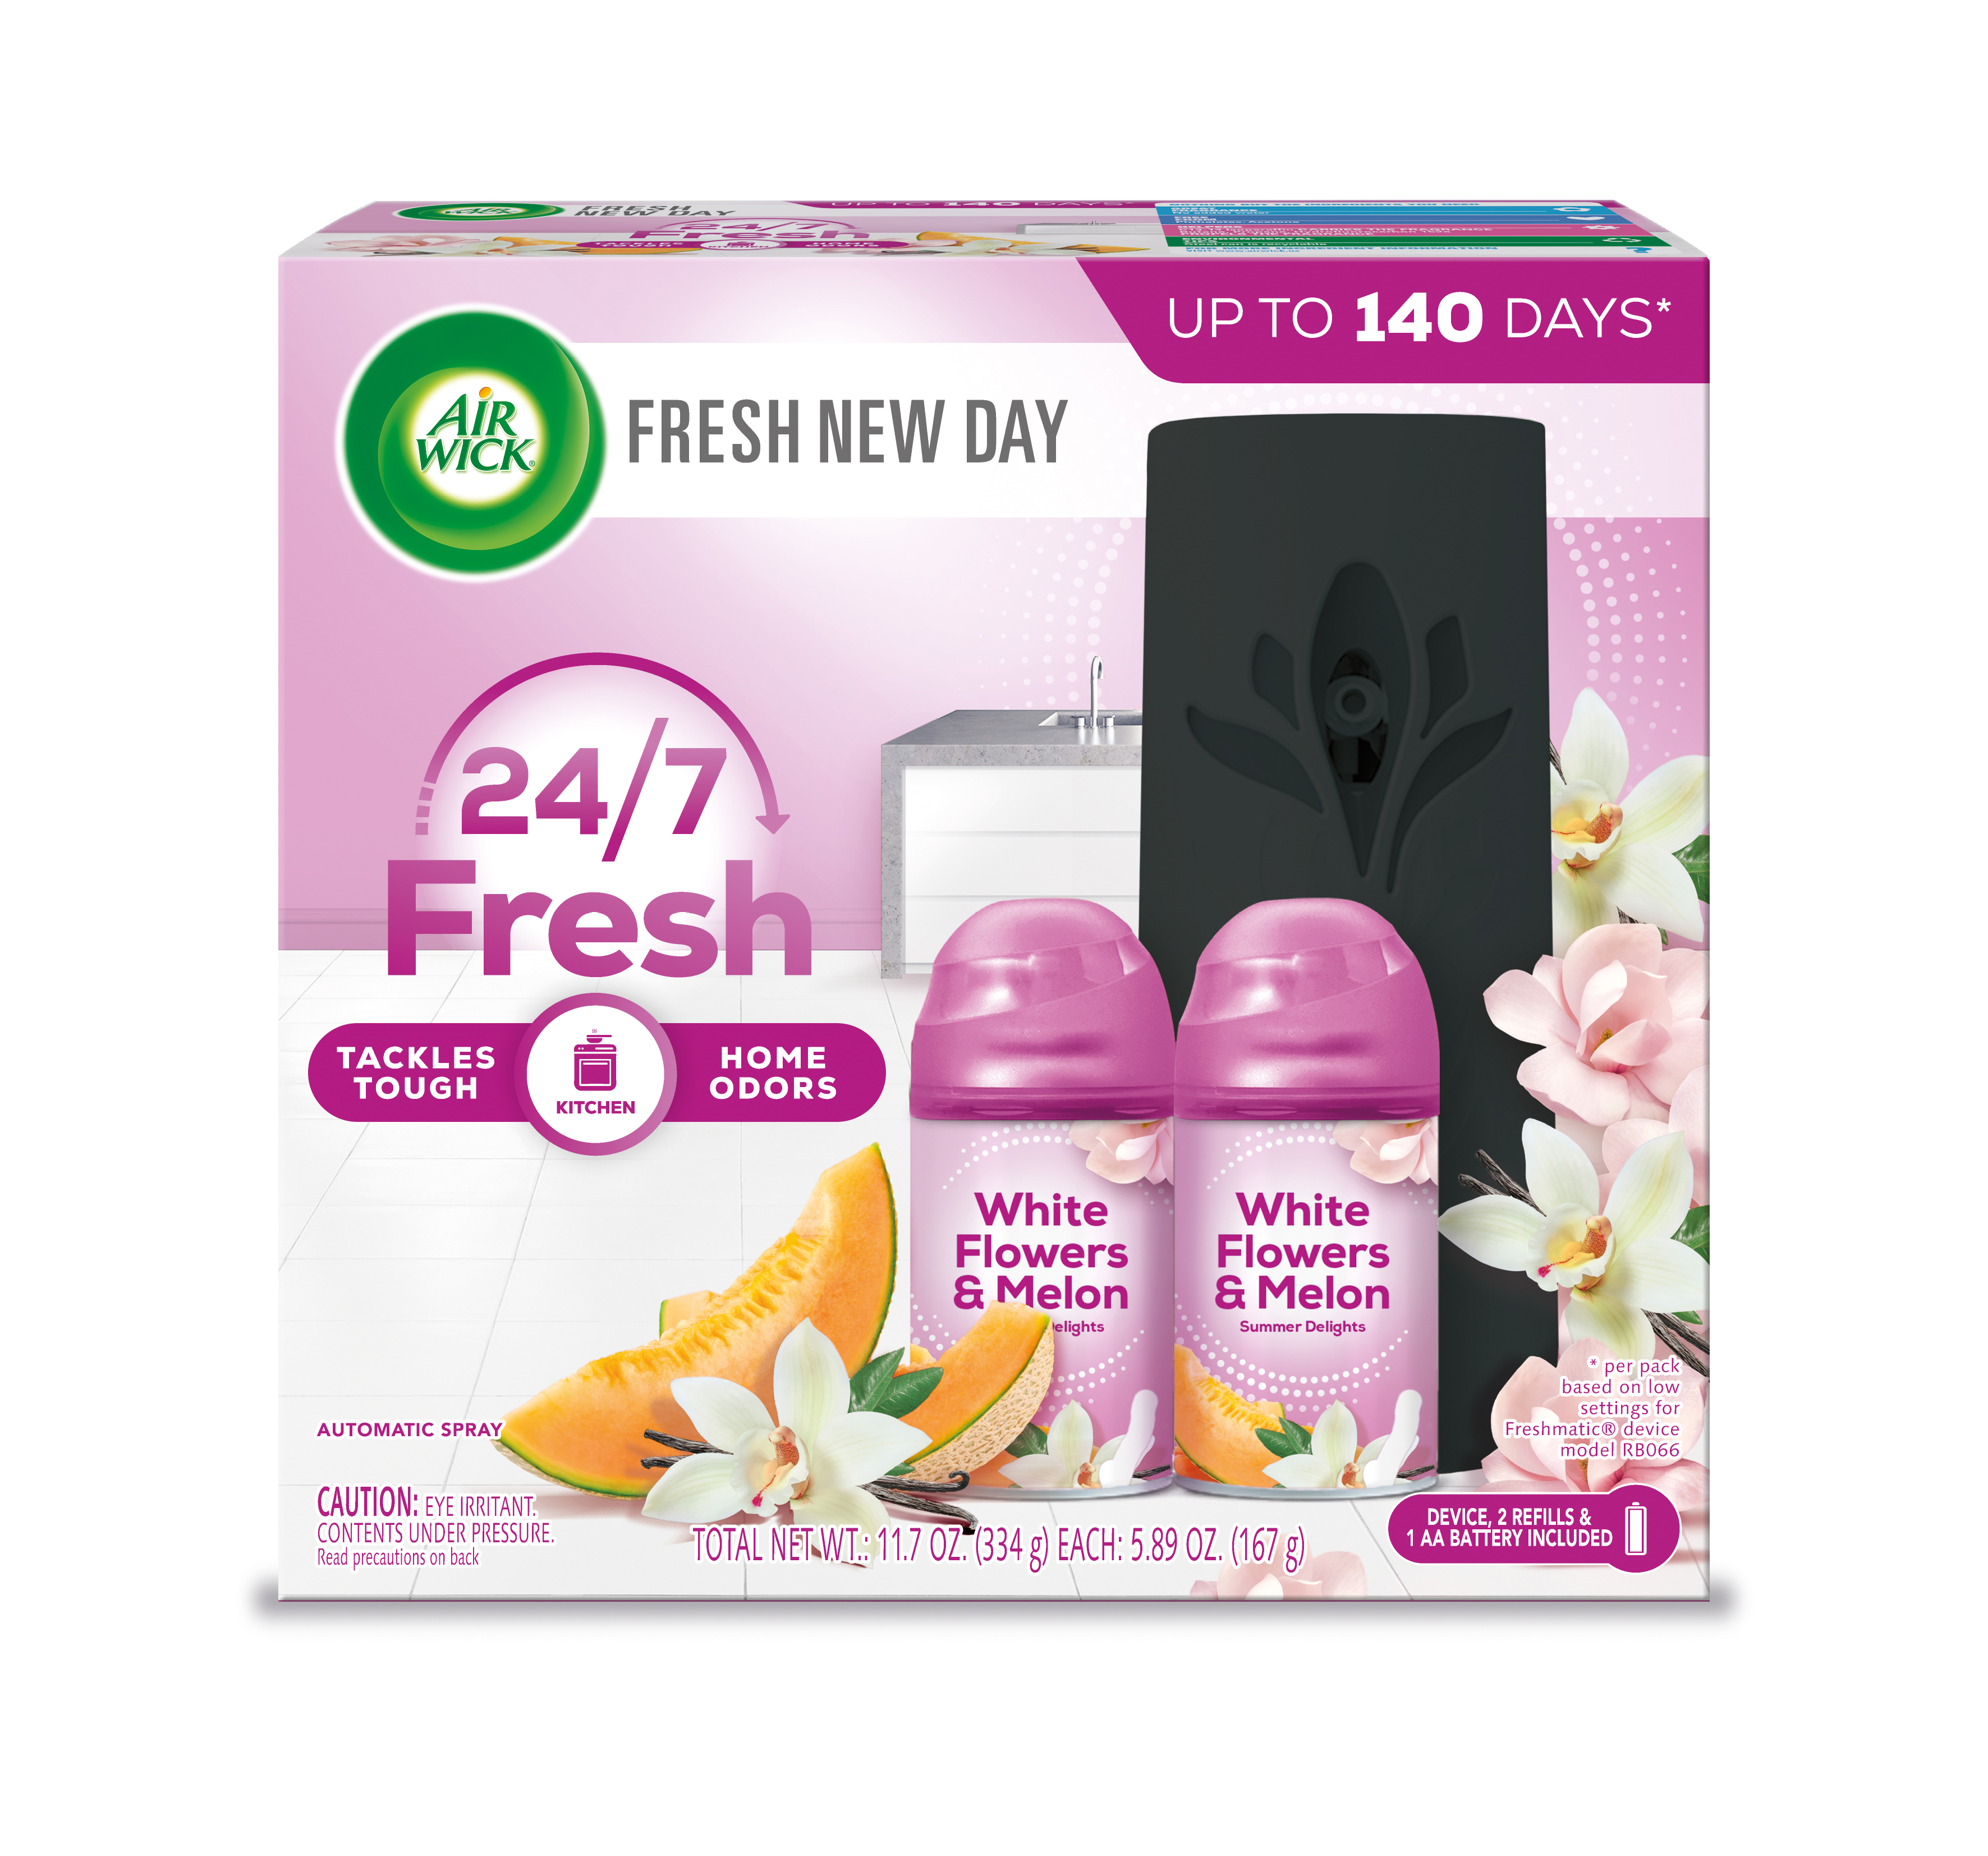 AIR WICK Automatic Spray  White Flowers  Melon Summer Delights  Kit